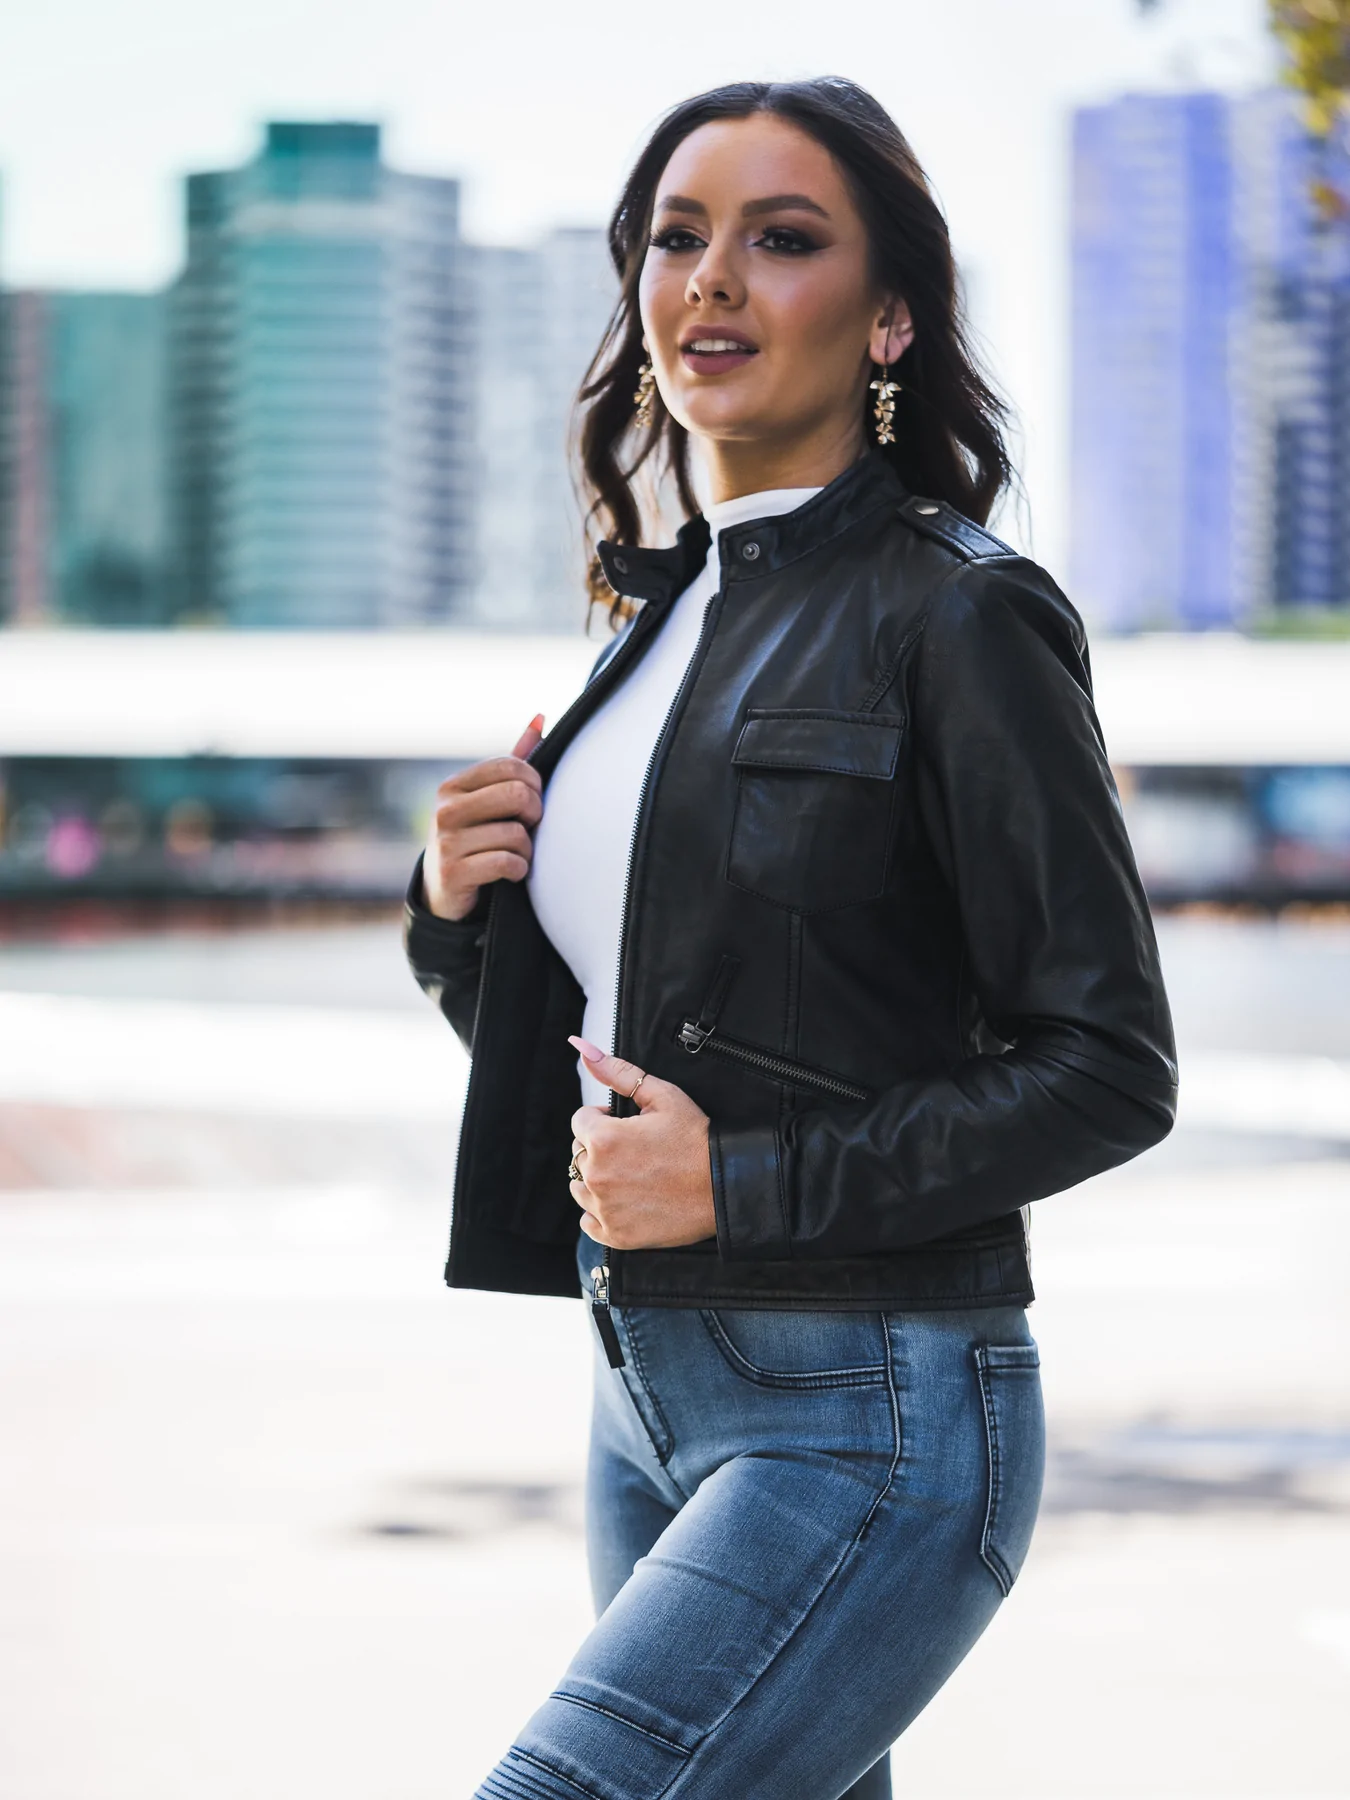 Girl styling with Black Leather Jacket Outfit